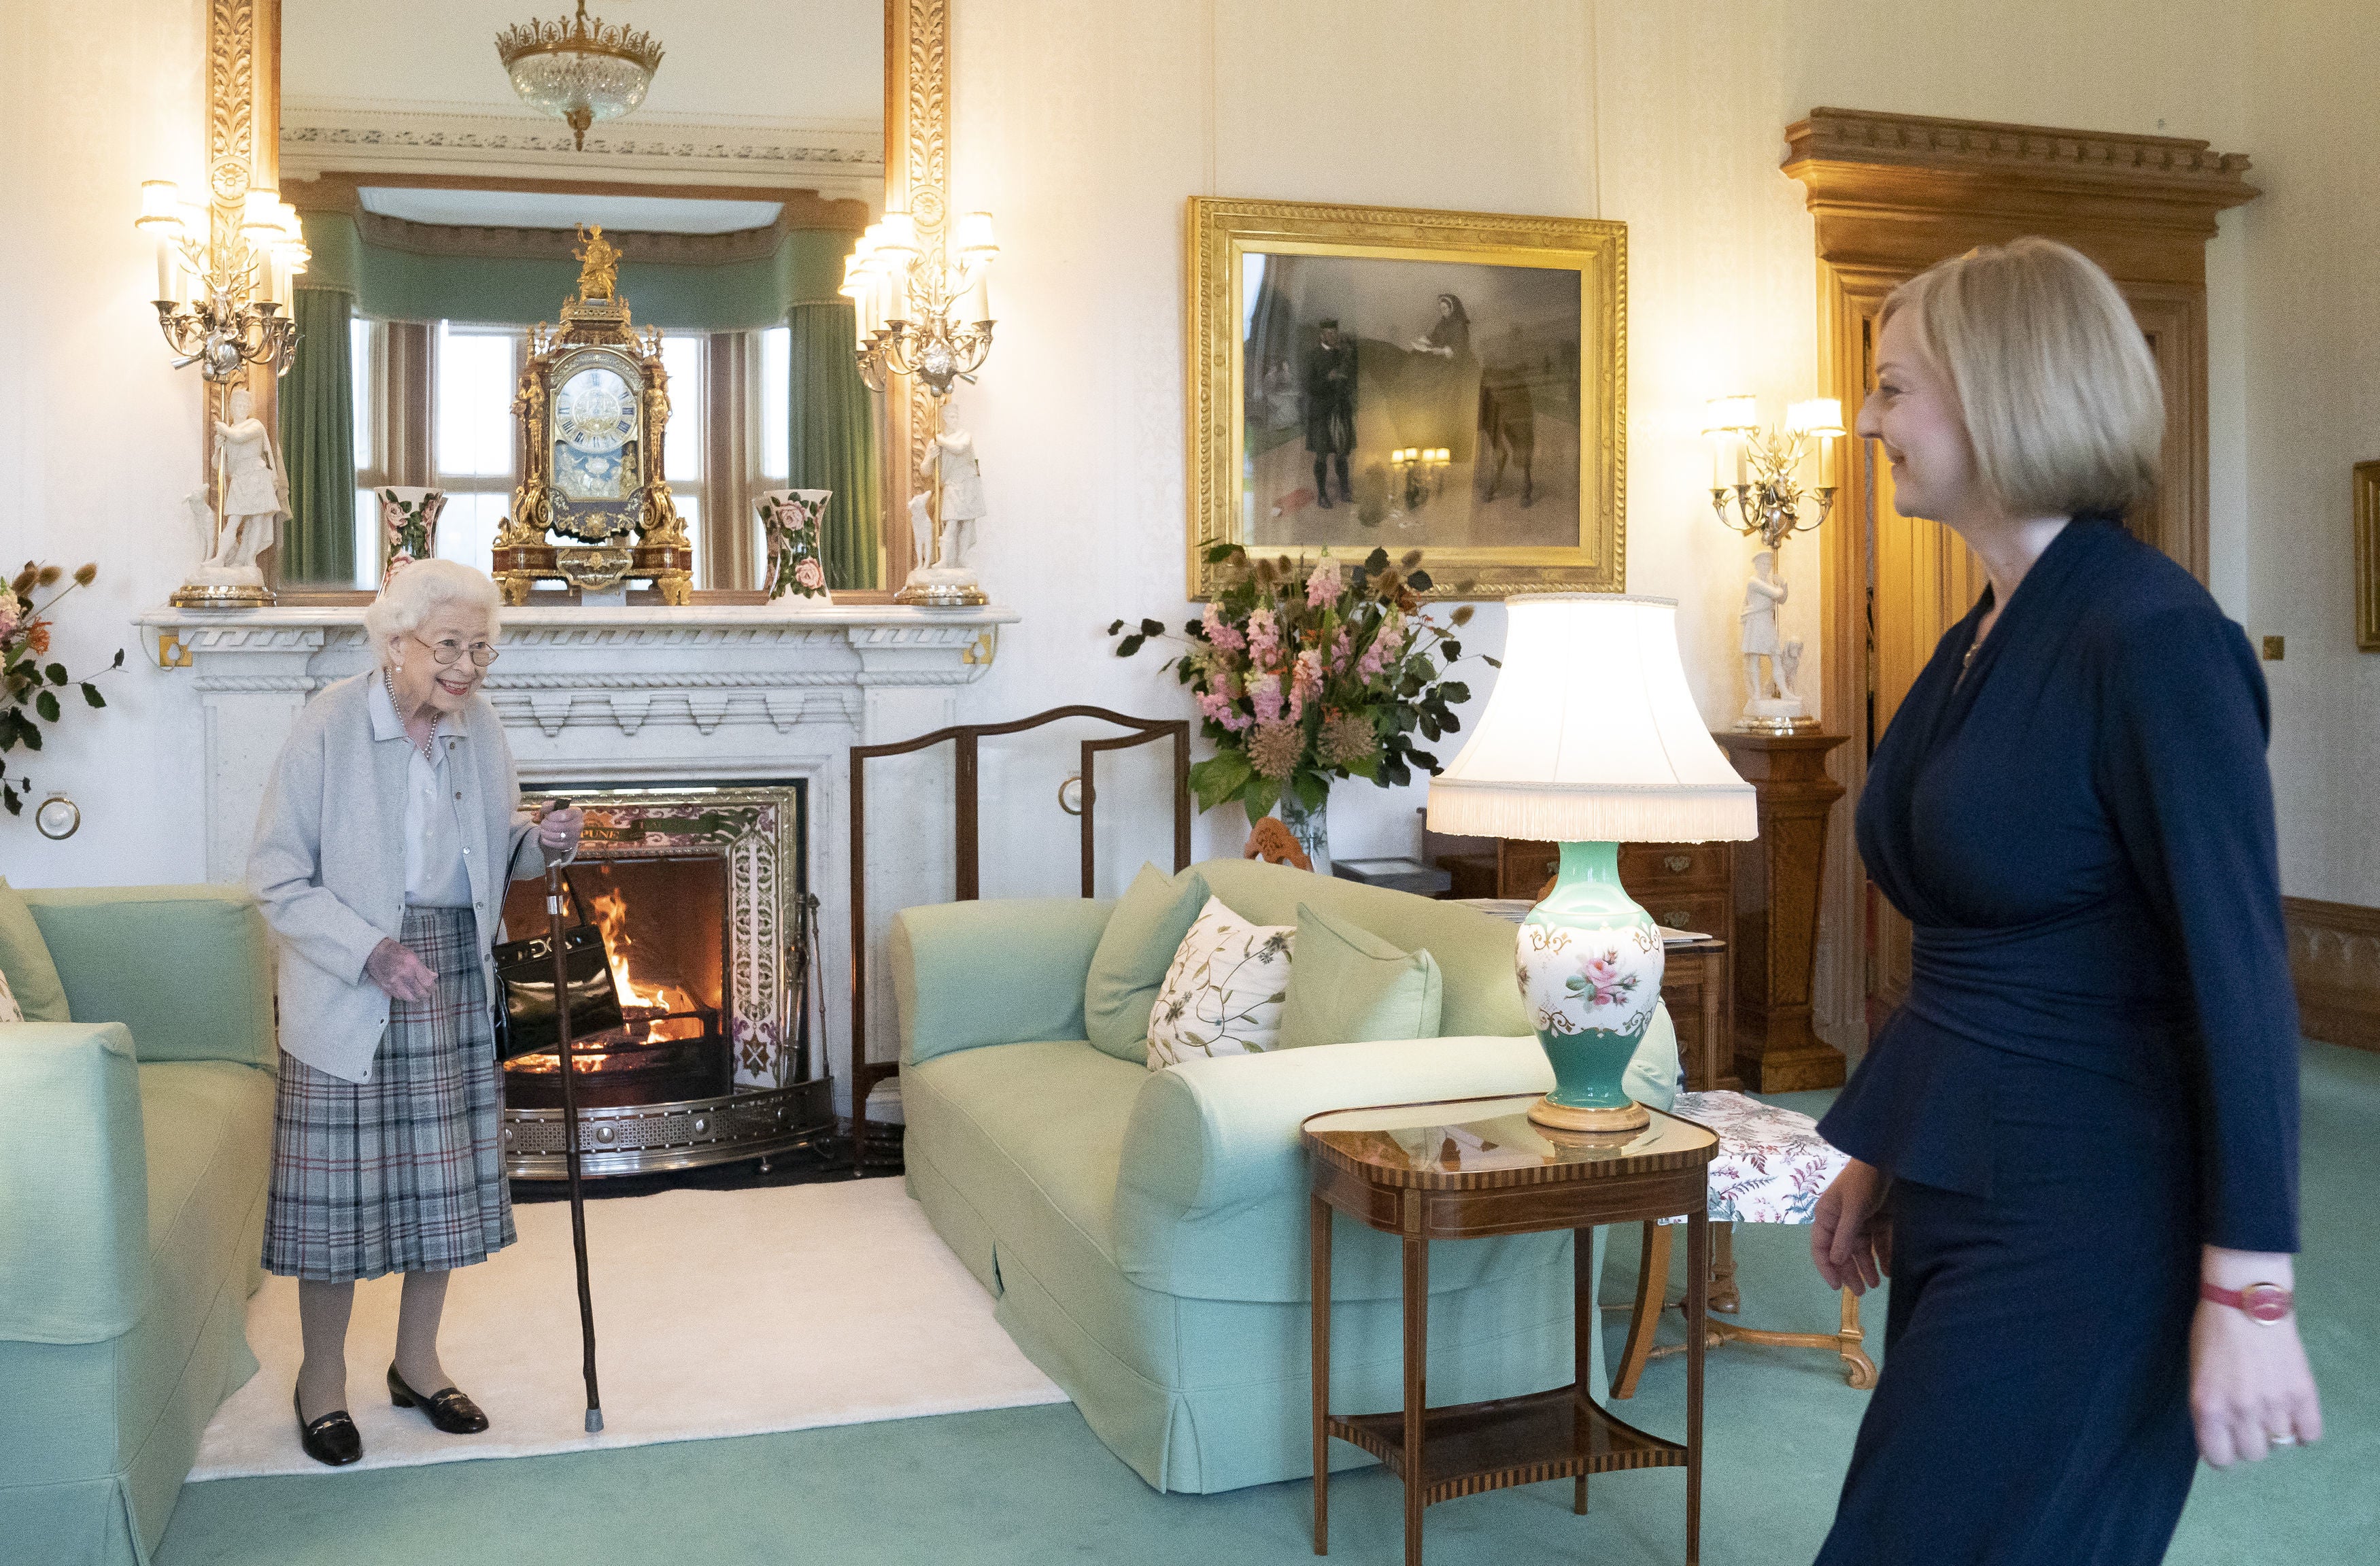 The Queen welcomes Liz Truss during an audience at Balmoral, Scotland, where she was confirmed as the new prime minister